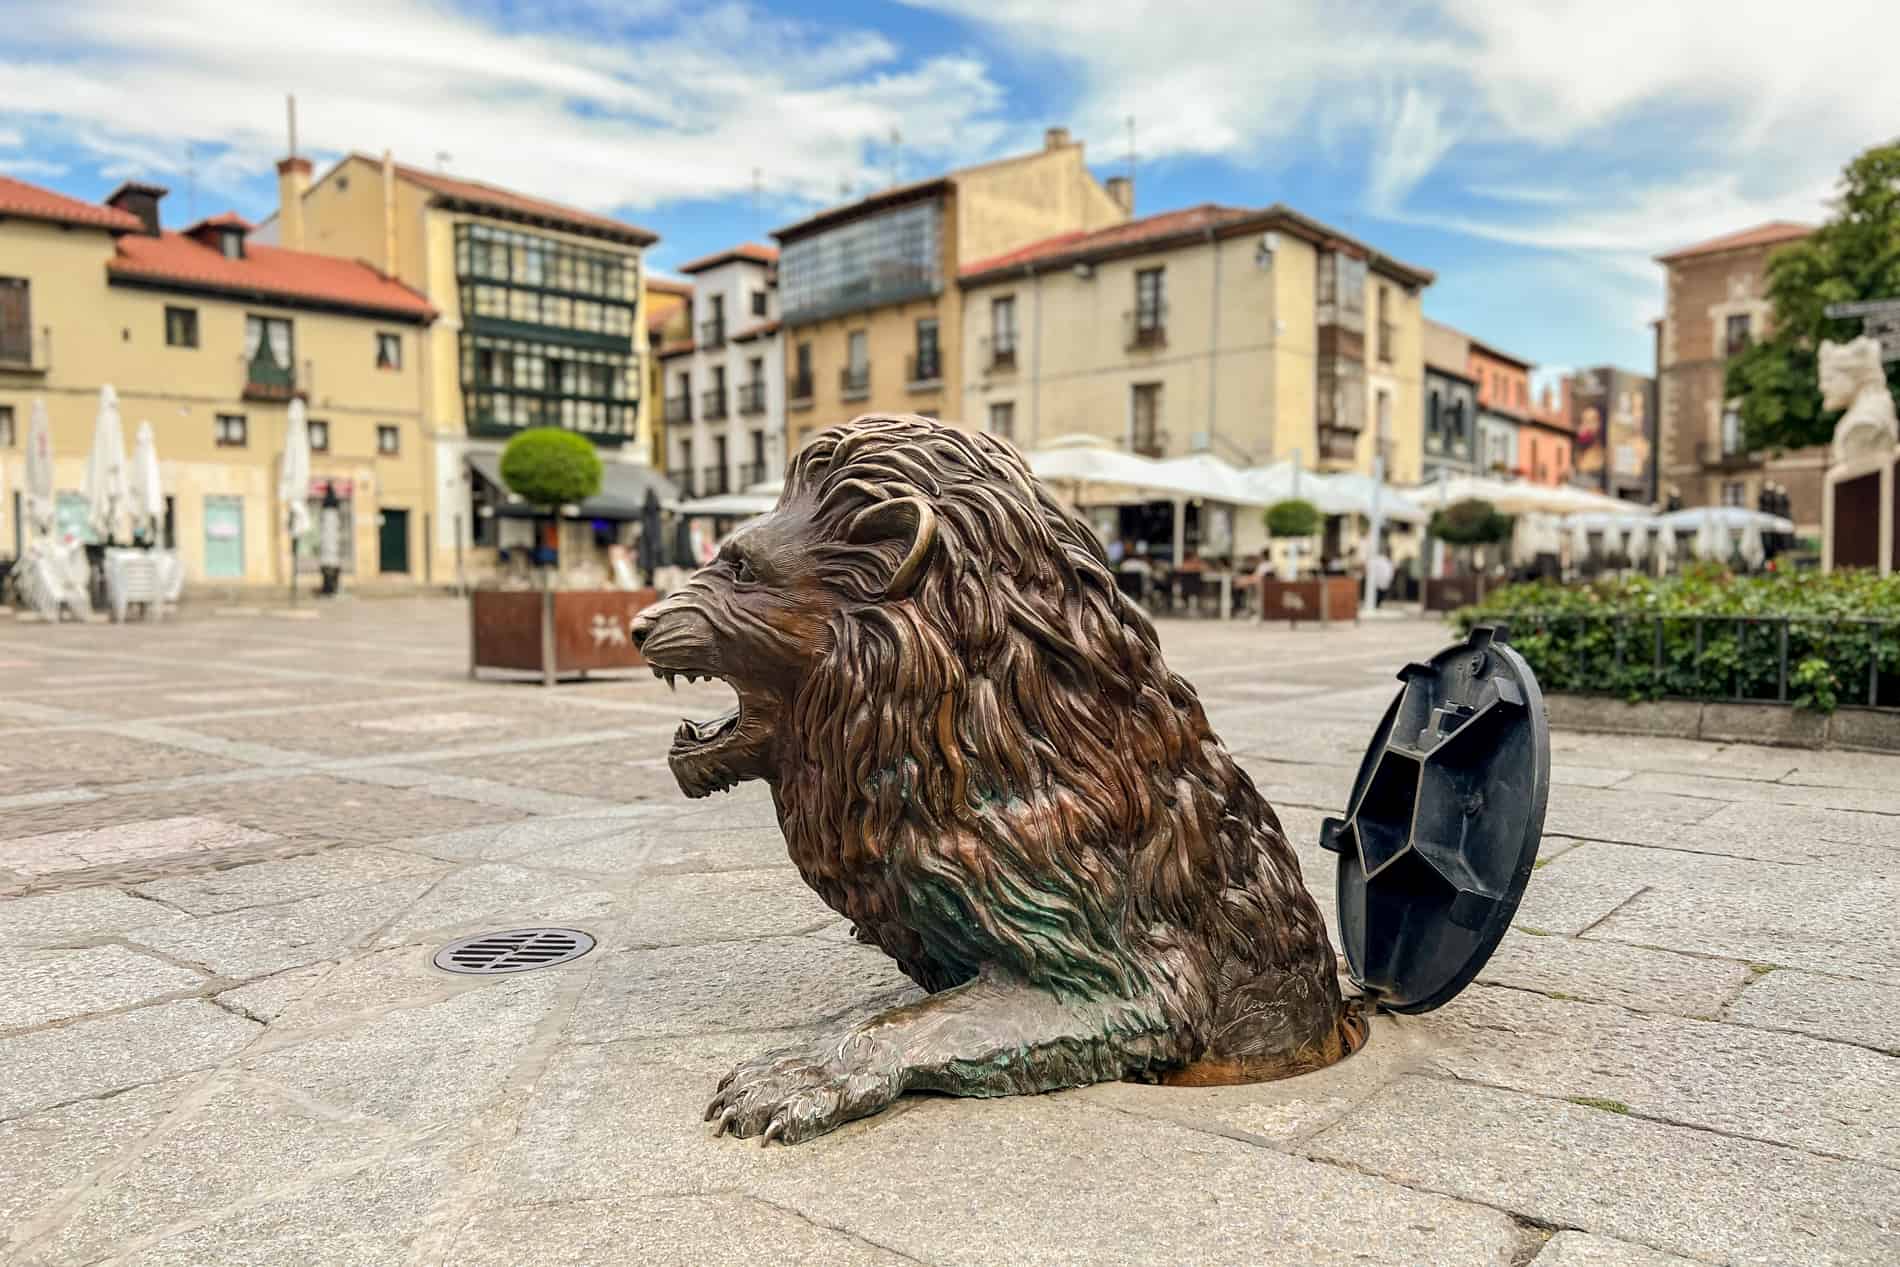 A bronze sculpture of a lion coming out of a drain hole in a public square in León city. 